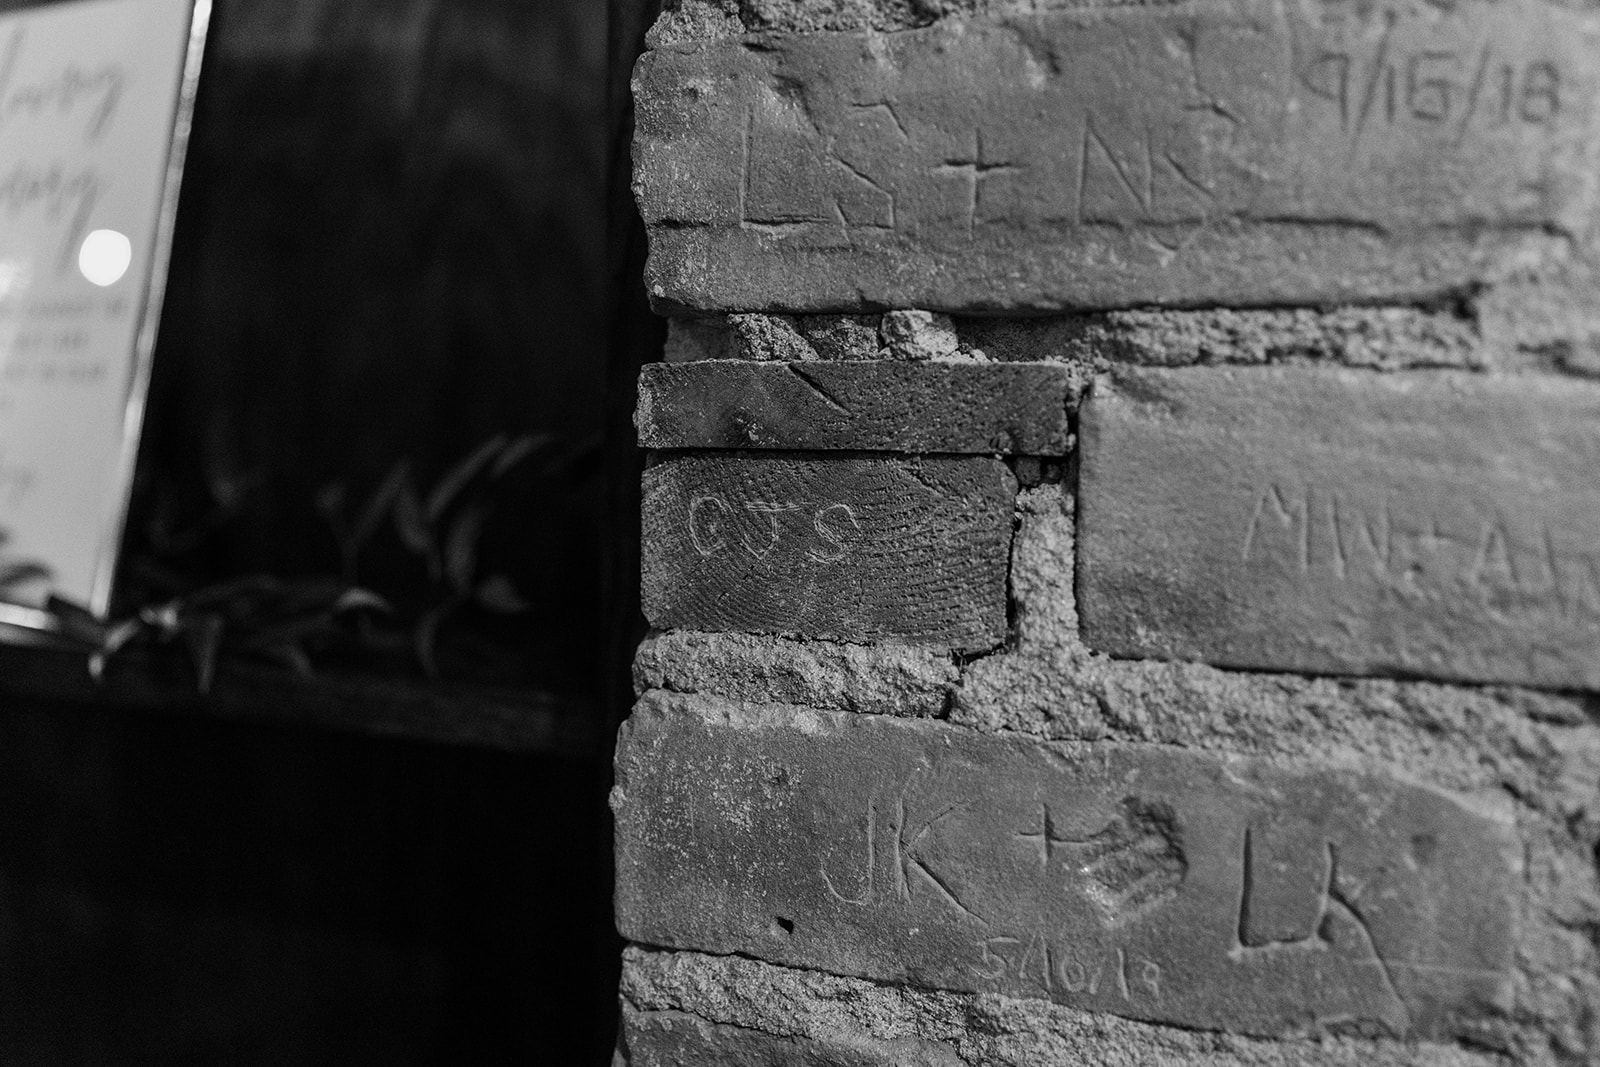 Bride and groom's initials carved into the walls of their wedding venue.